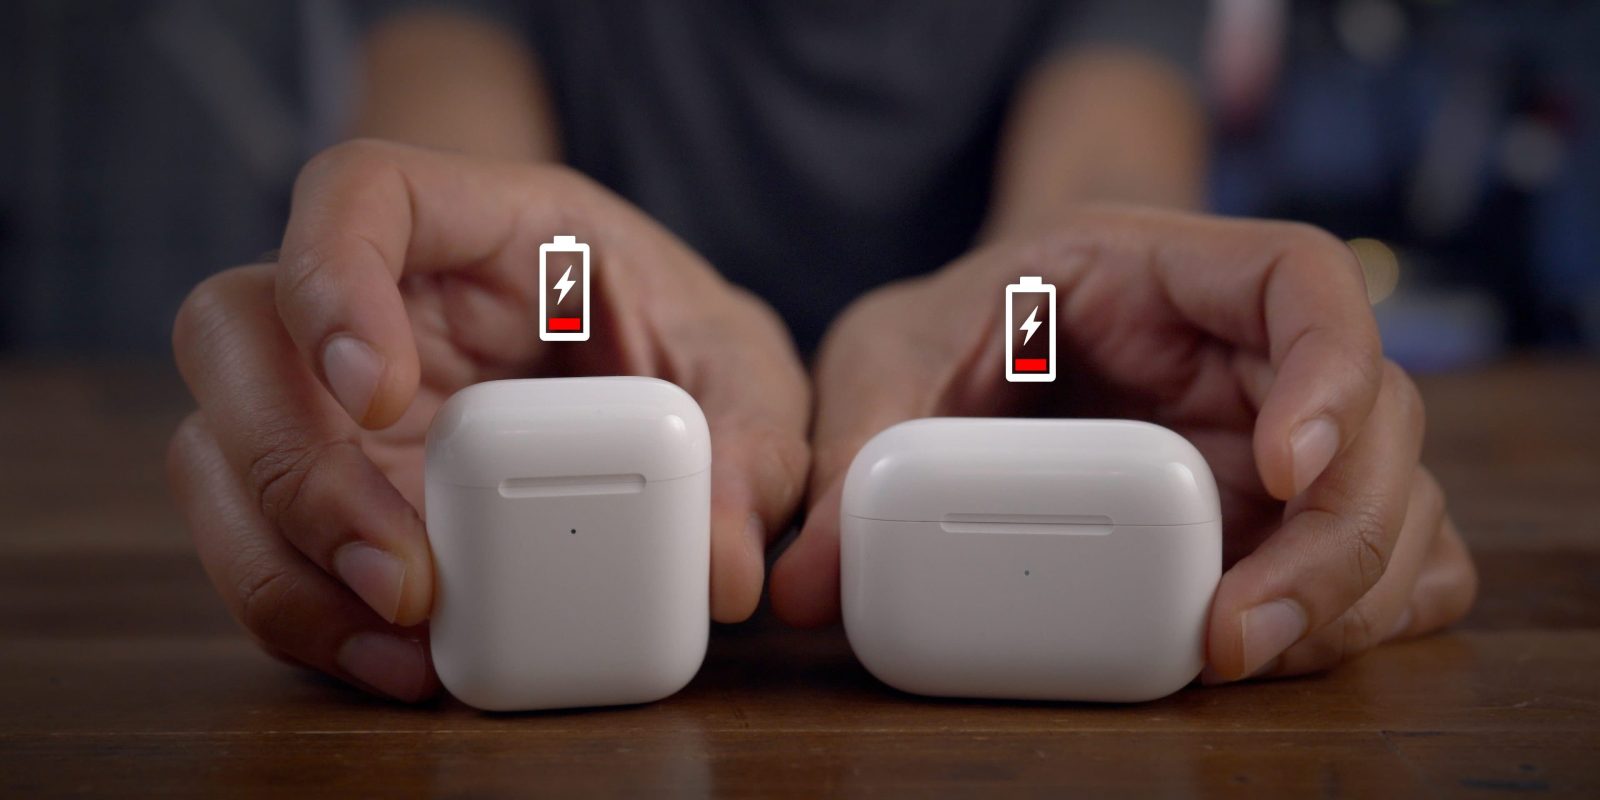 What to do with old/dying AirPods